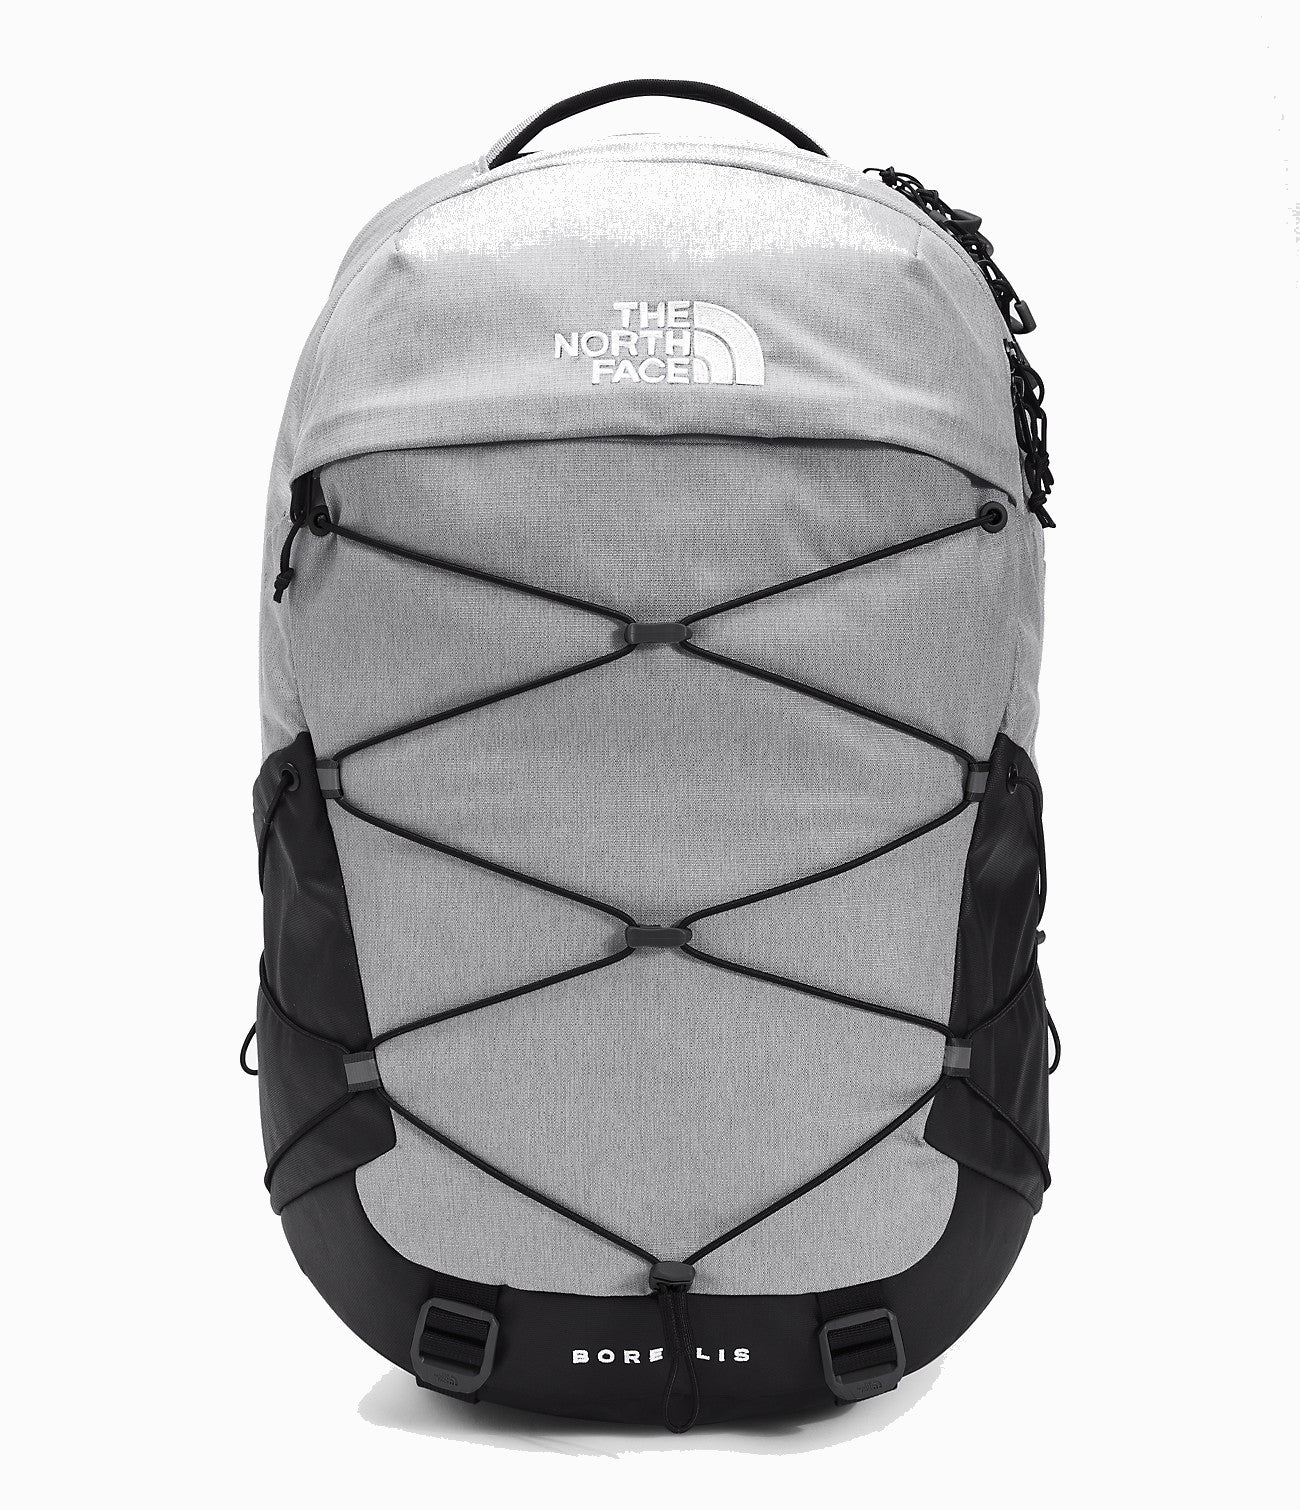 The North Face Borealis Backpack Accessories North Face Meld Grey Dark Heather/TNF Black-201  